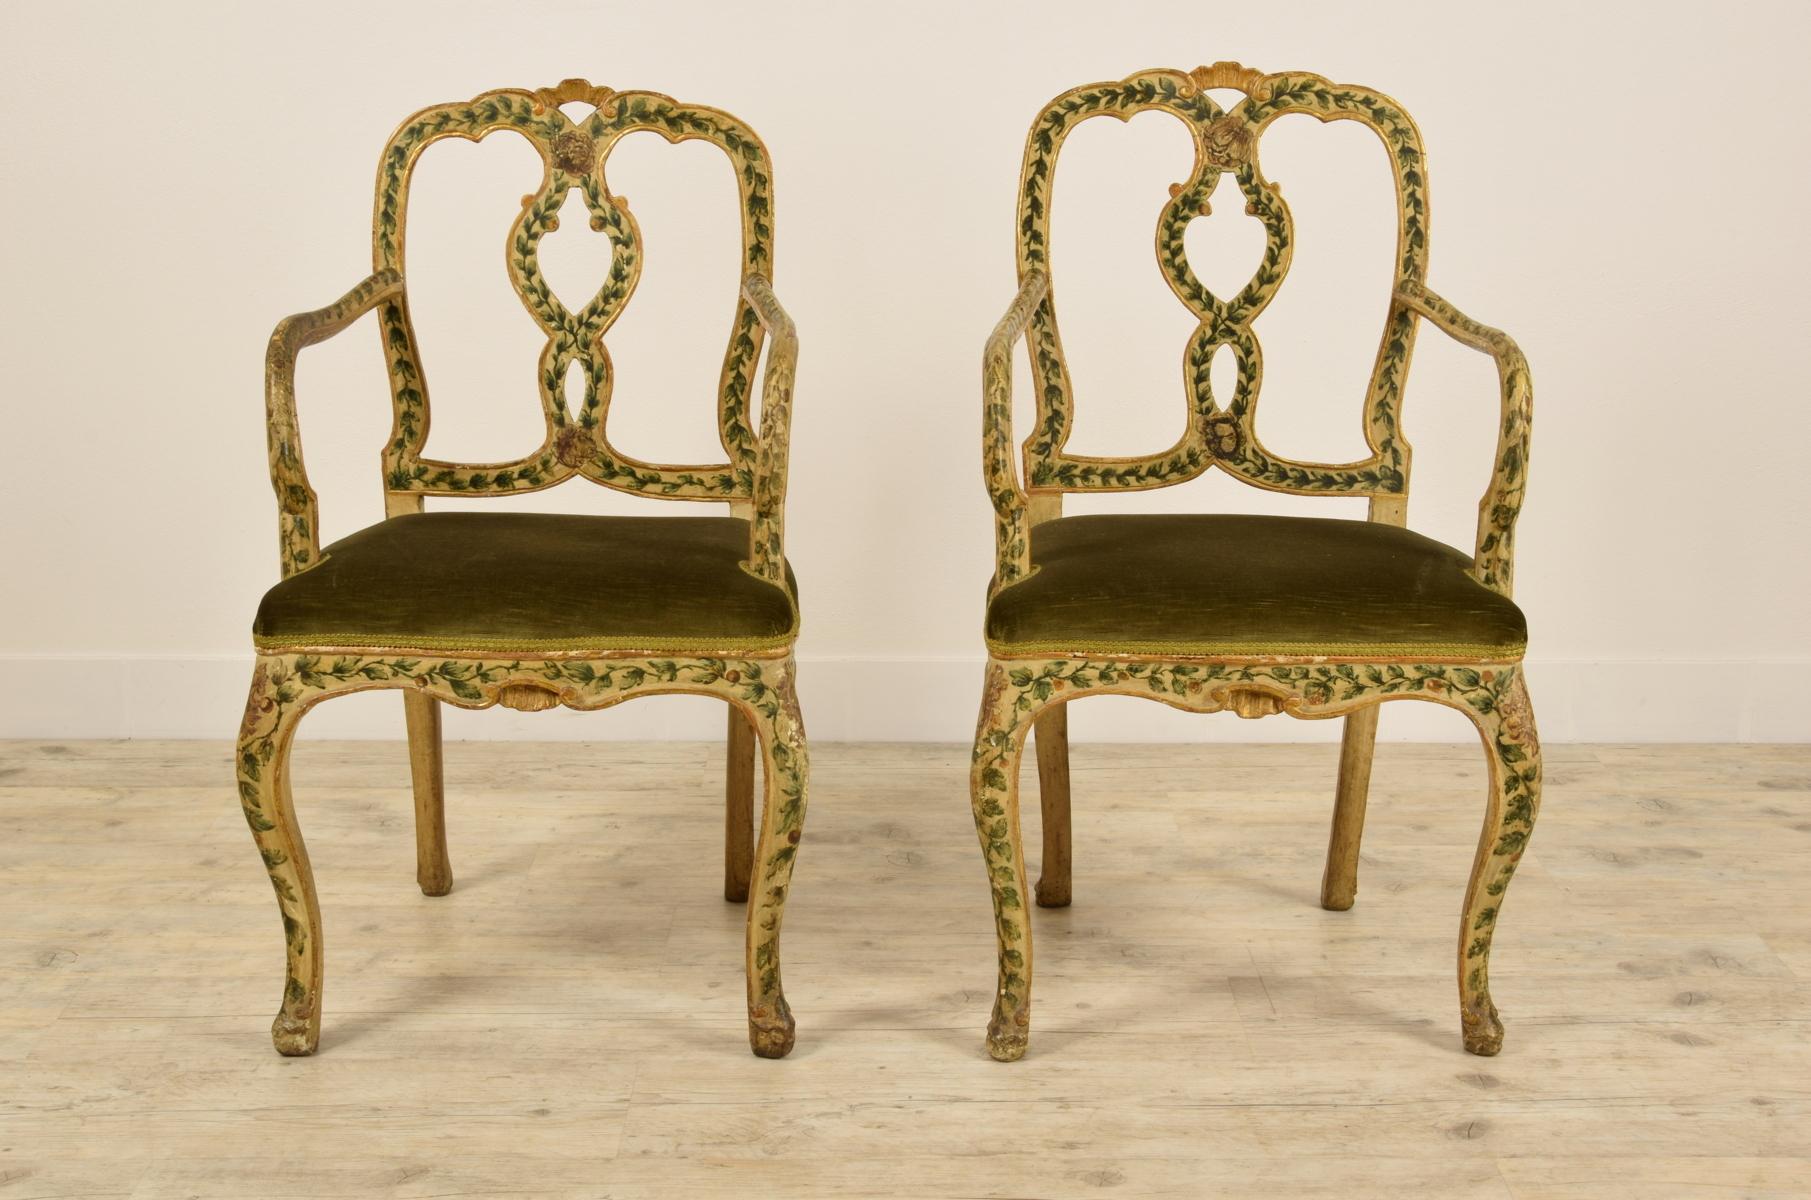 Fine pair of Venetian armchairs in polychrome lacquered wood with vegetal motifs and golden details.
Venice, Italy, mid-18th century 

The lovely pair of armchairs is made in Venice in the middle of the 18th century, Louis XV. The wood,